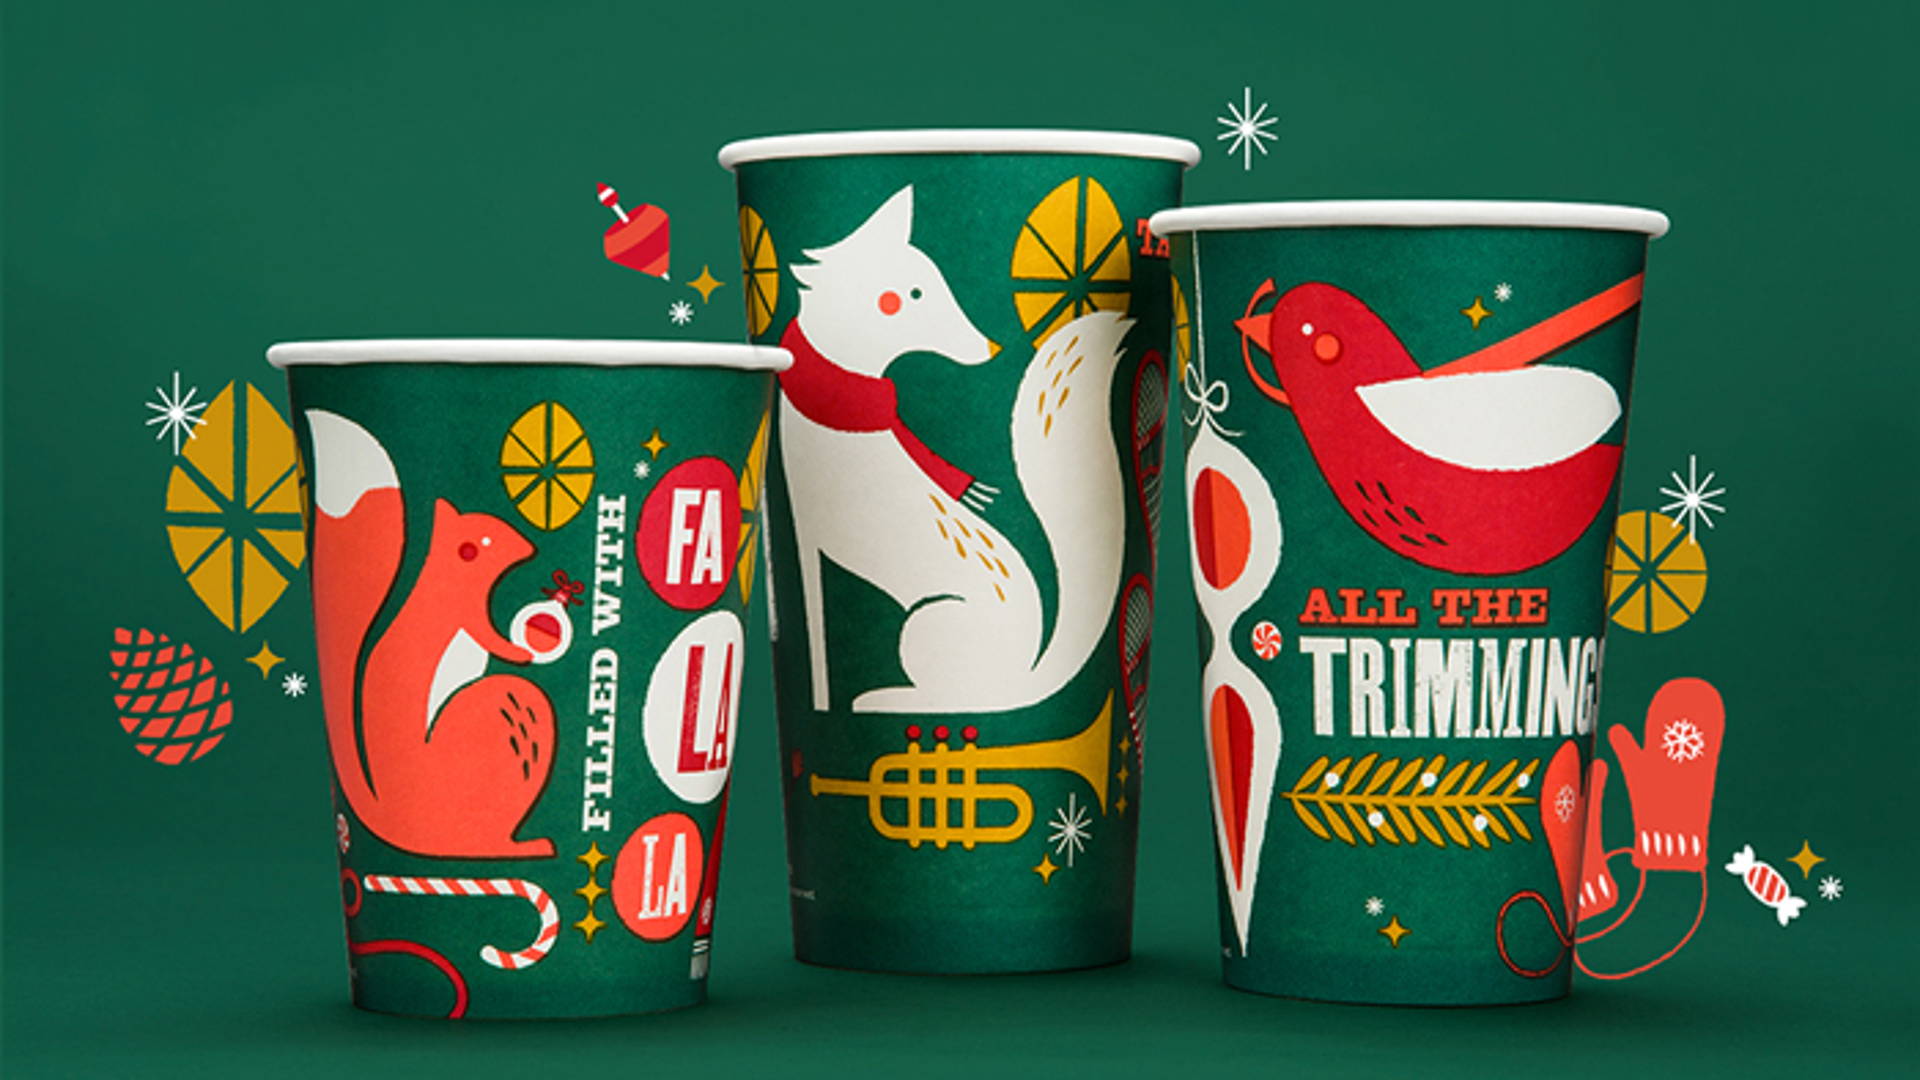 Featured image for Panera Bread 2013 Holiday Packaging